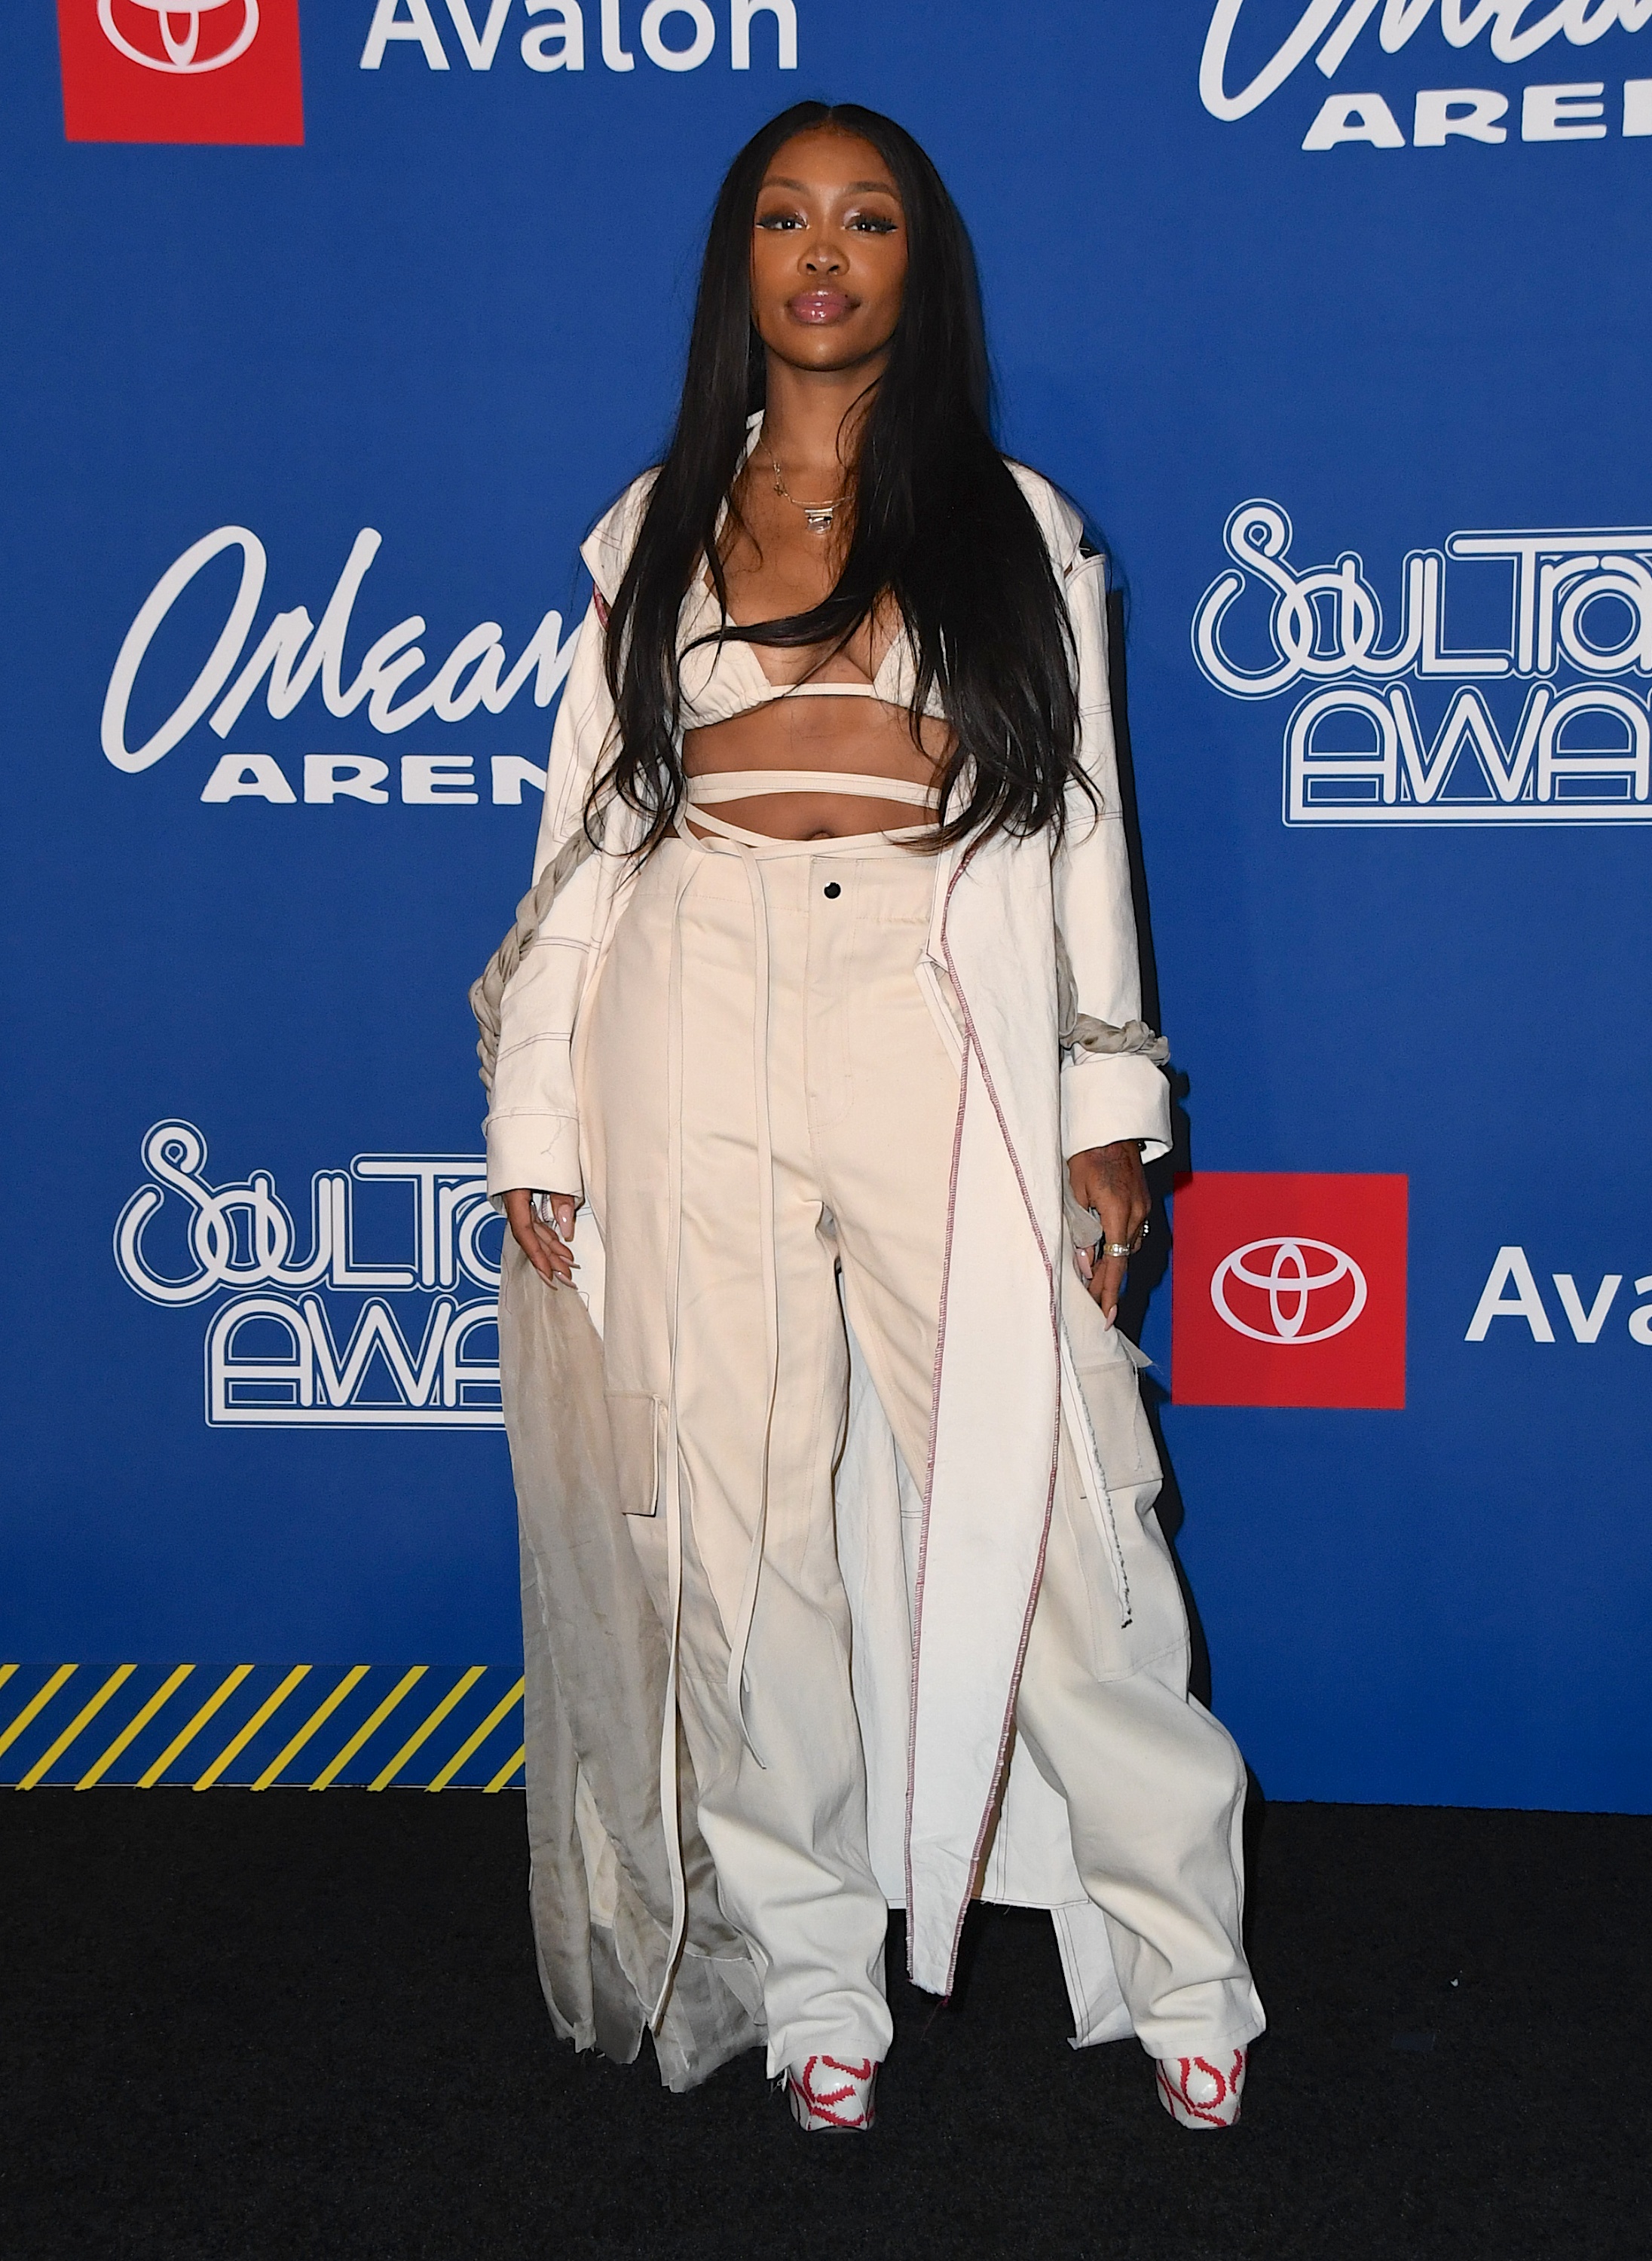 Just Dropped: SZA's Style Evolution